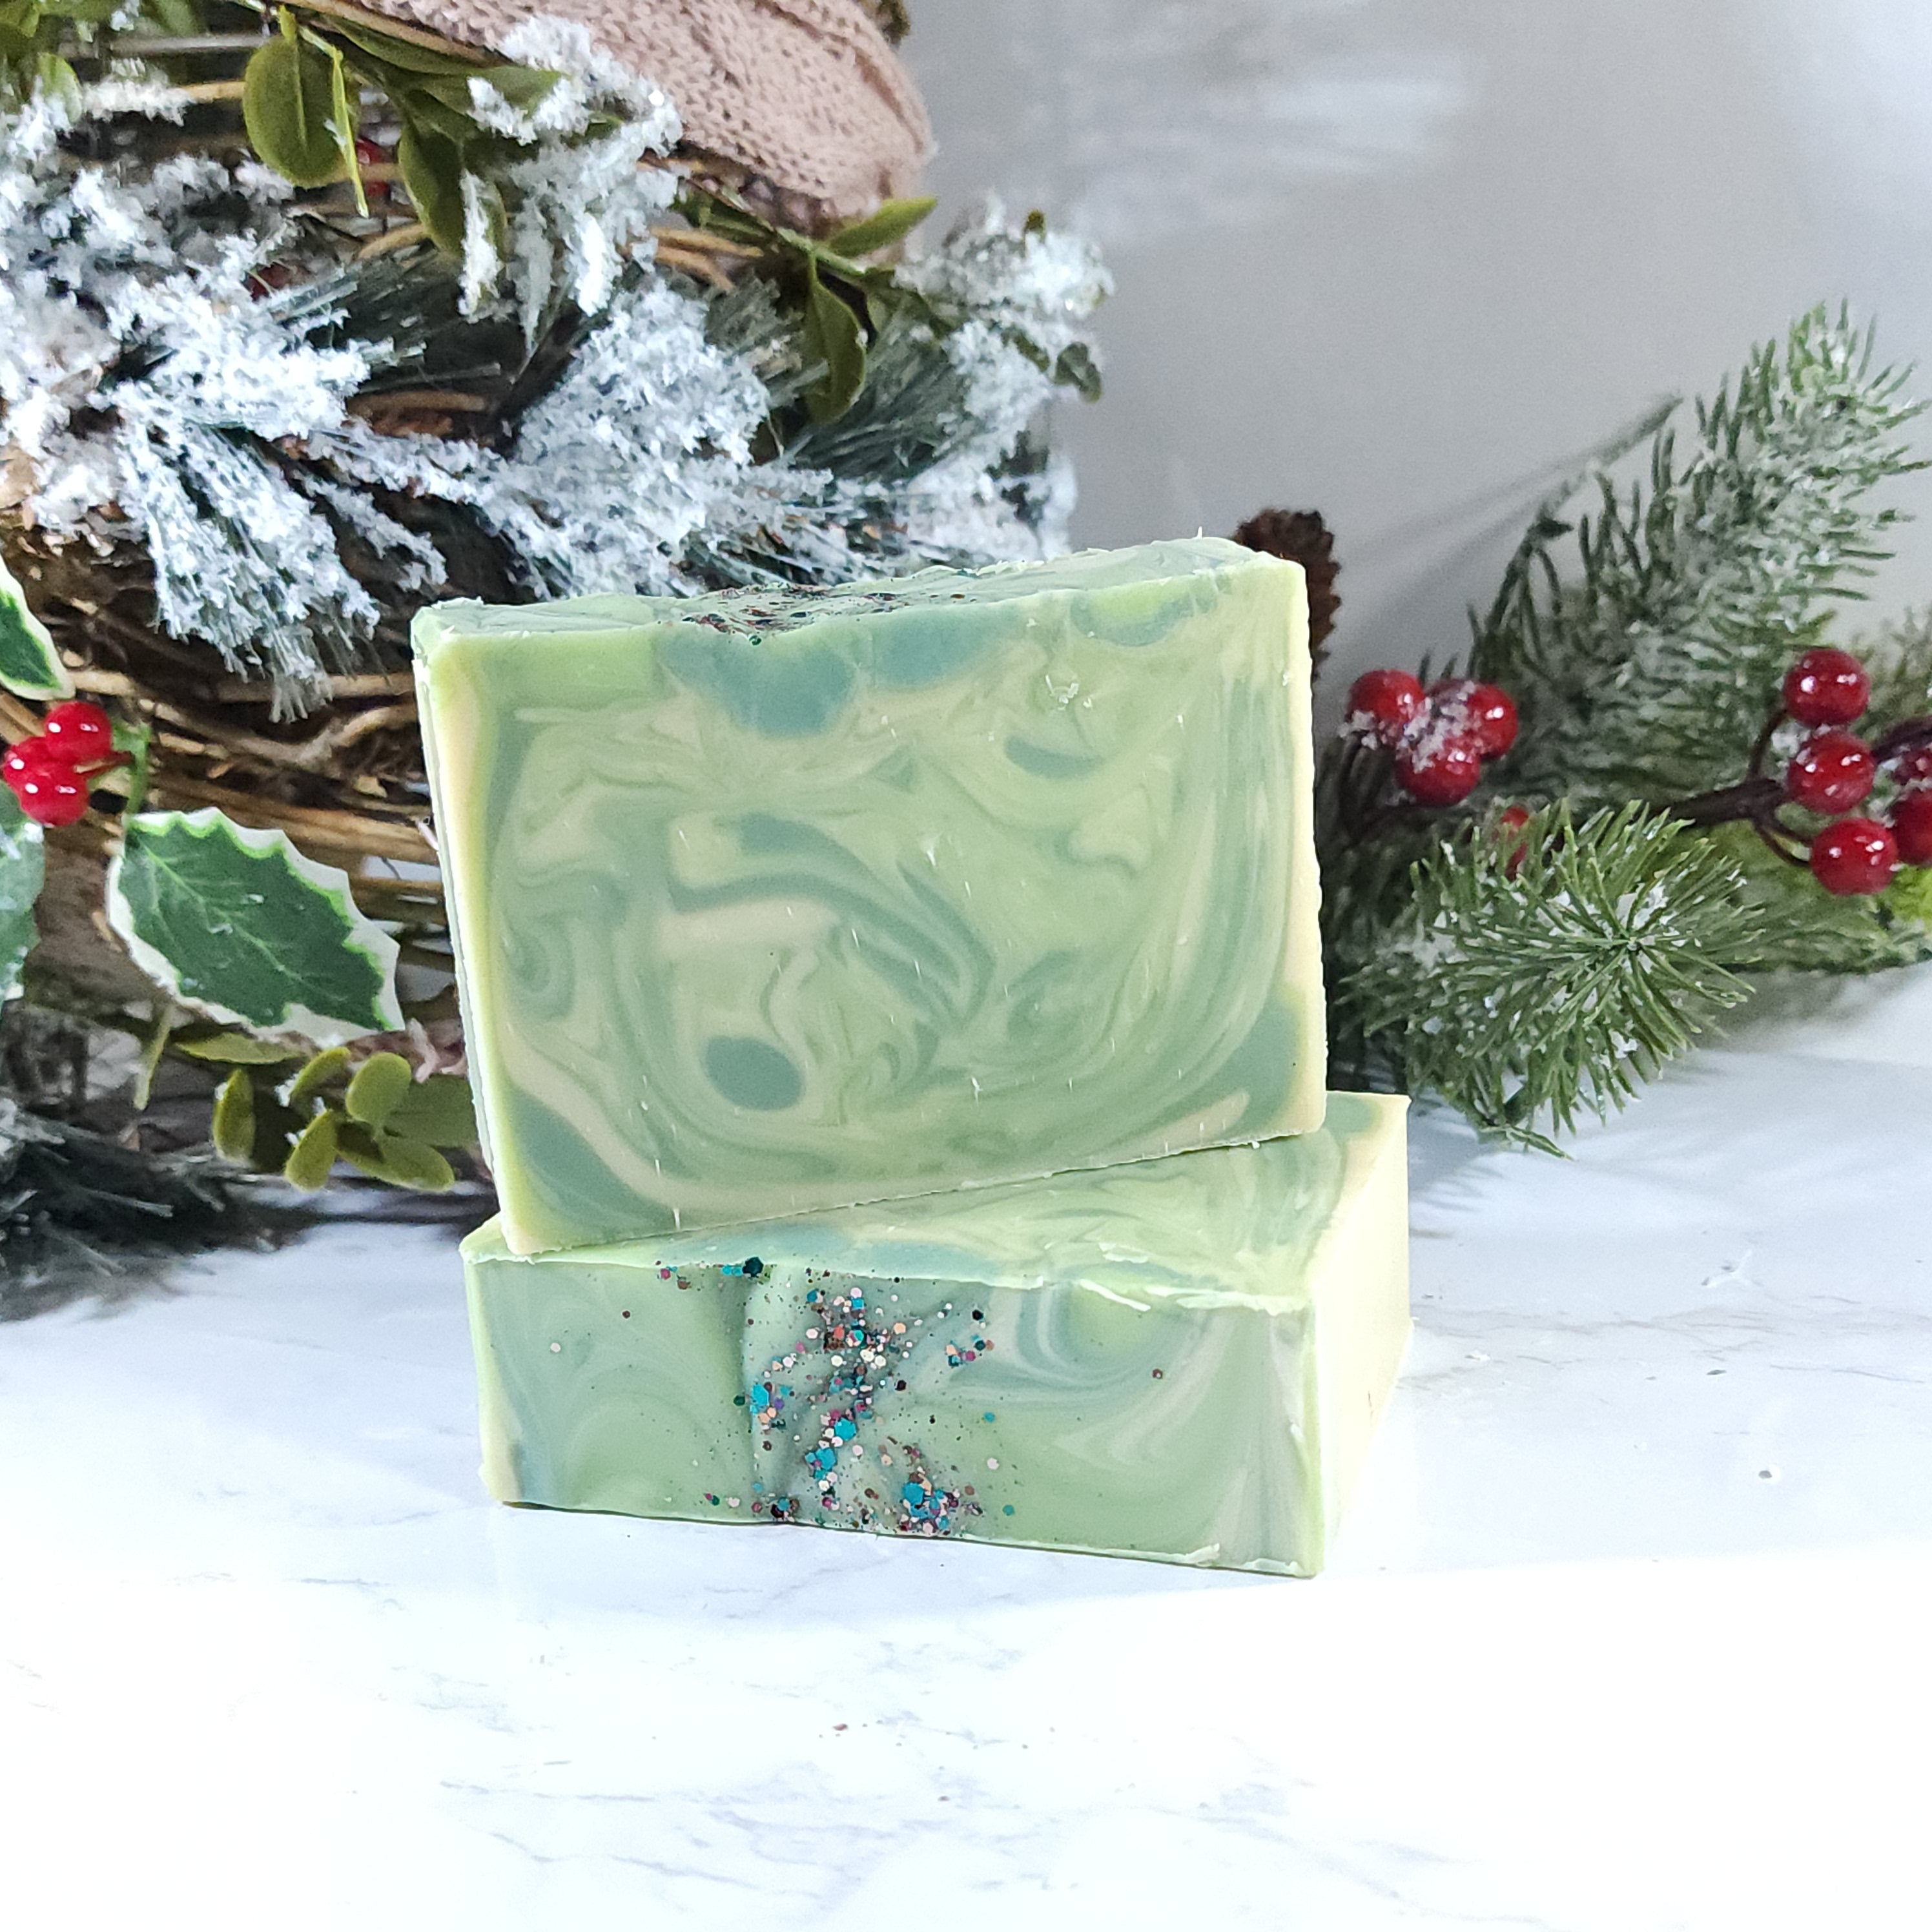 Snuggle Weather Soap Bar Diana's Candles and Soaps